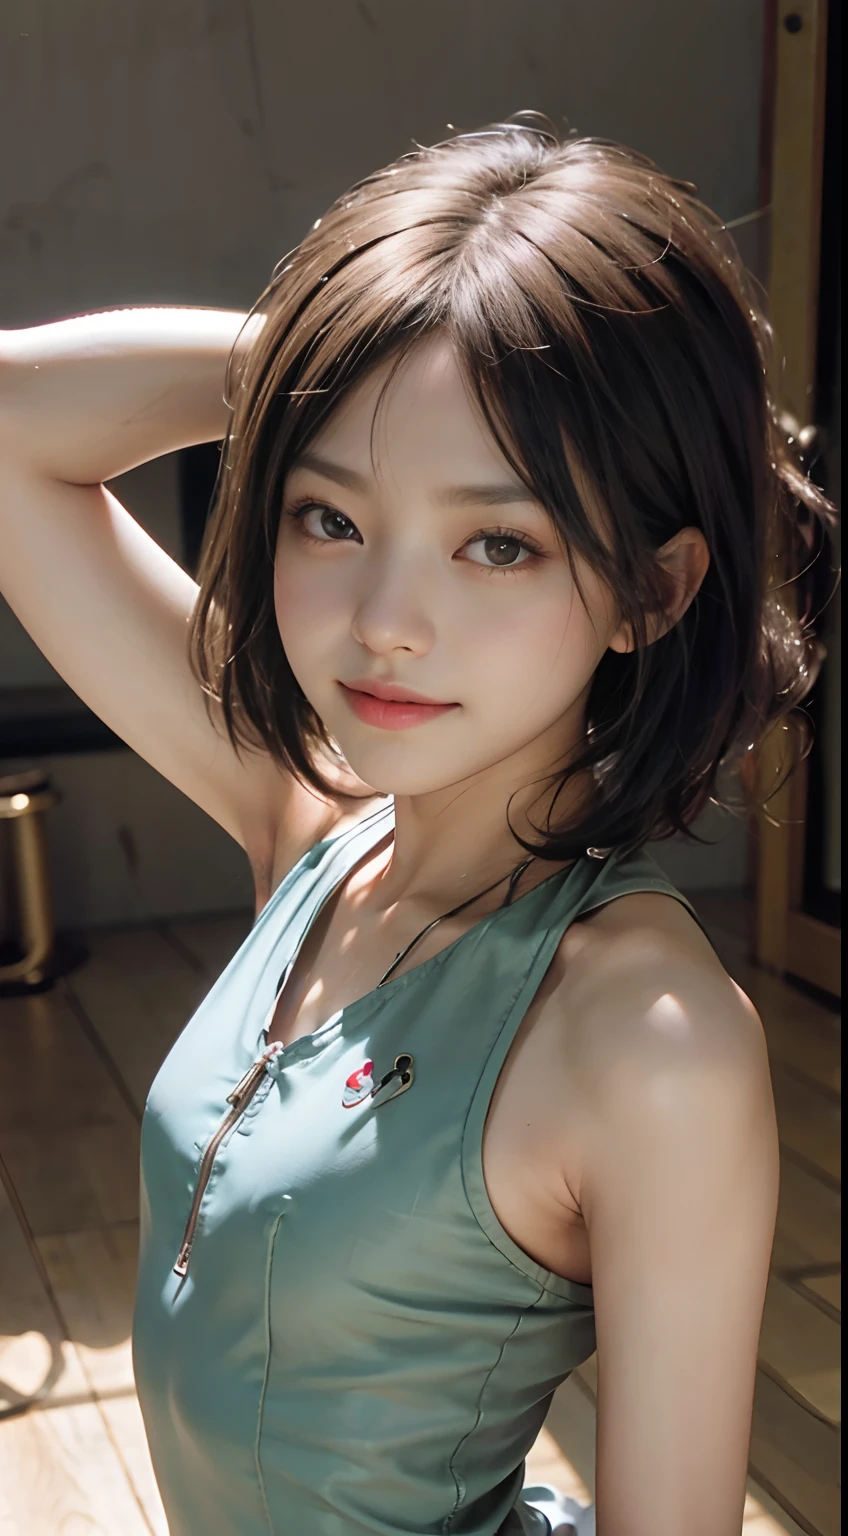 Top image quality、超A high resolution、masutepiece、Photoquality(photographrealistic:1.8)、pores、accuracy、Japan women、17 age、Girl Smile、A dark-haired、Cute dimples、Non-makeup、short cut haixing hair with hairpins、Bobby Ping、Boyish girl、Slender girl、Small breasts like a 、tiny chest、 、Flat-breasted 、Vast gymnasium、high ceilings、Light from the ceiling、[GYMTASTIC、balance beam、Indoor gymnastics arena、Luxury Leotards、Glittering costumes、See-through bodysuit、Red edging、High leg cut、Nipple sheer、 Protruding、camel's toe、Spread your arms、Performance of active gymnastics、laugh face、Have a good laugh、Look straight at me、Overhead view from below、